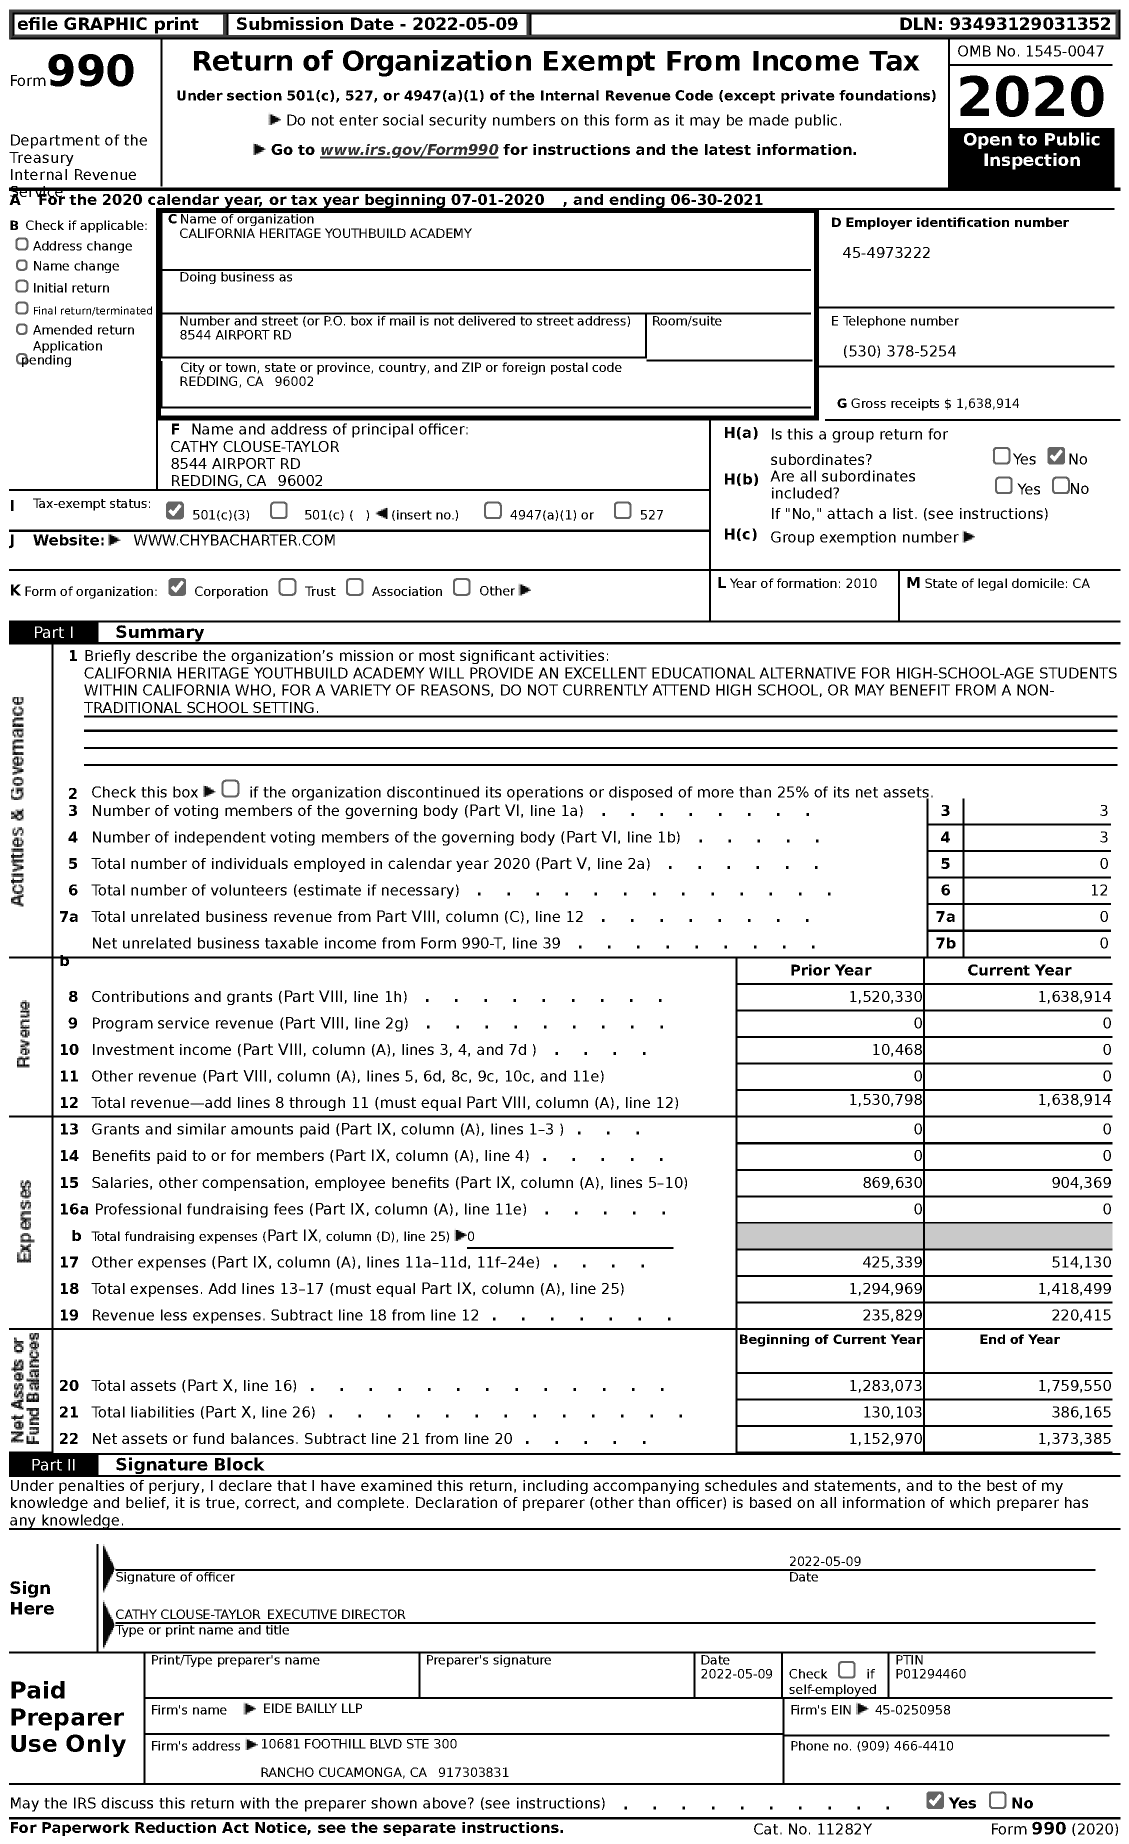 Image of first page of 2020 Form 990 for California Heritage Youthbuild Academy